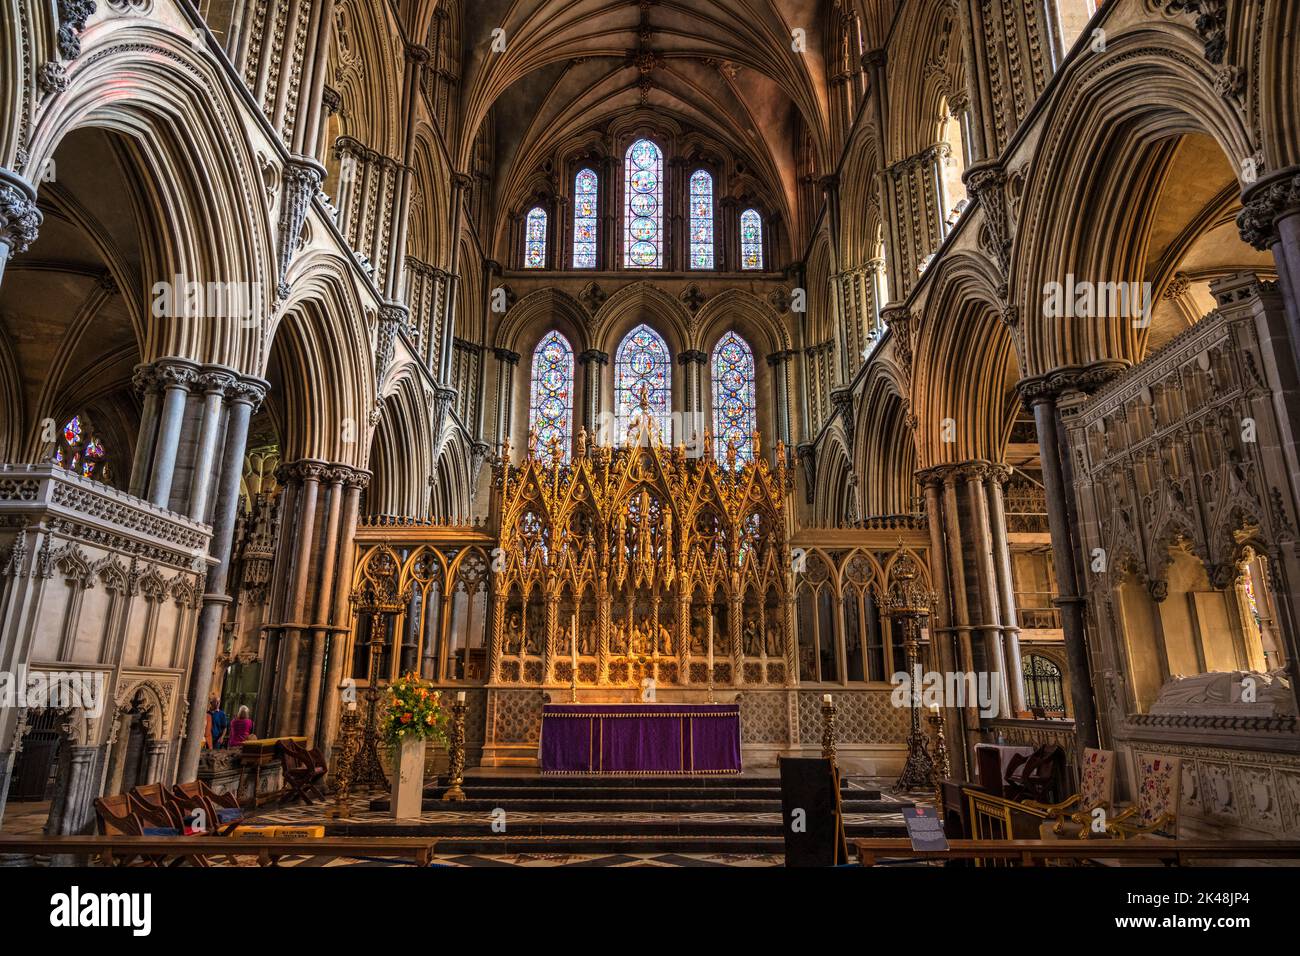 Presbytery and high altar of Ely Cathedral in Ely, Cambridgeshire, England, UK Stock Photo